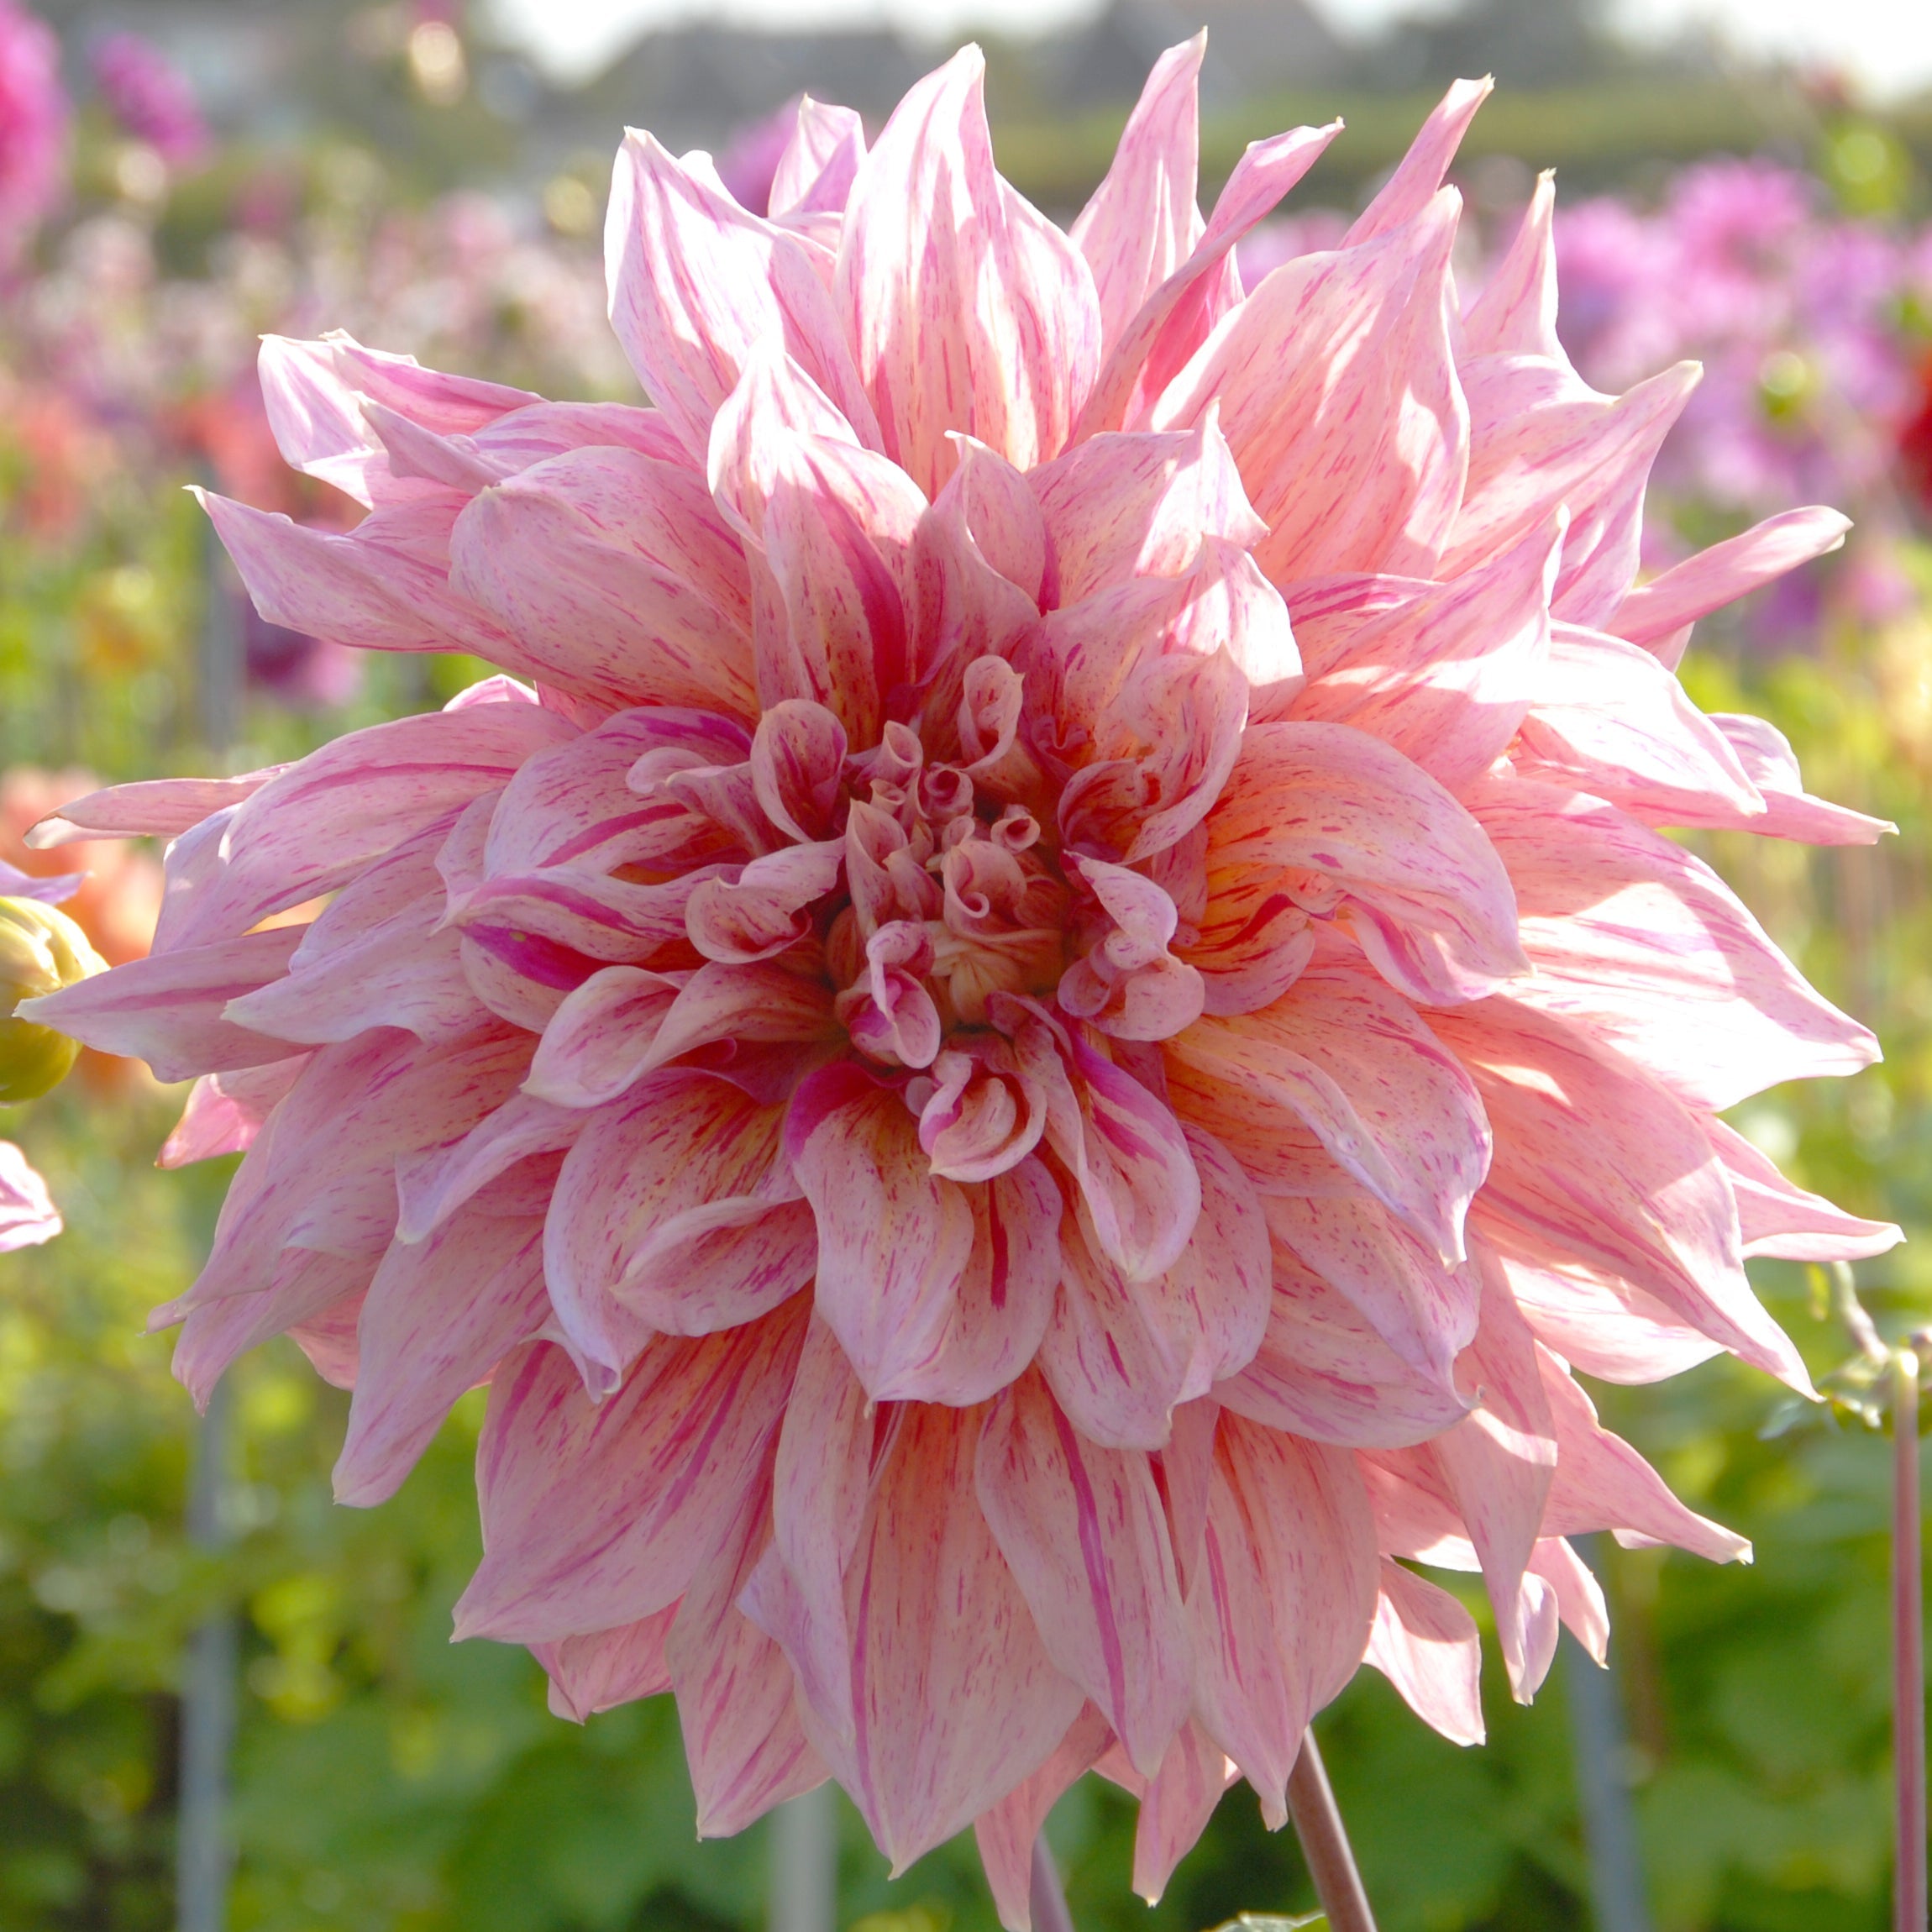 Dahlia 'Striped Emory Paul' decorative dinnerplate flowered - 2, 3 or 5 tubers - Free delivery within the UK